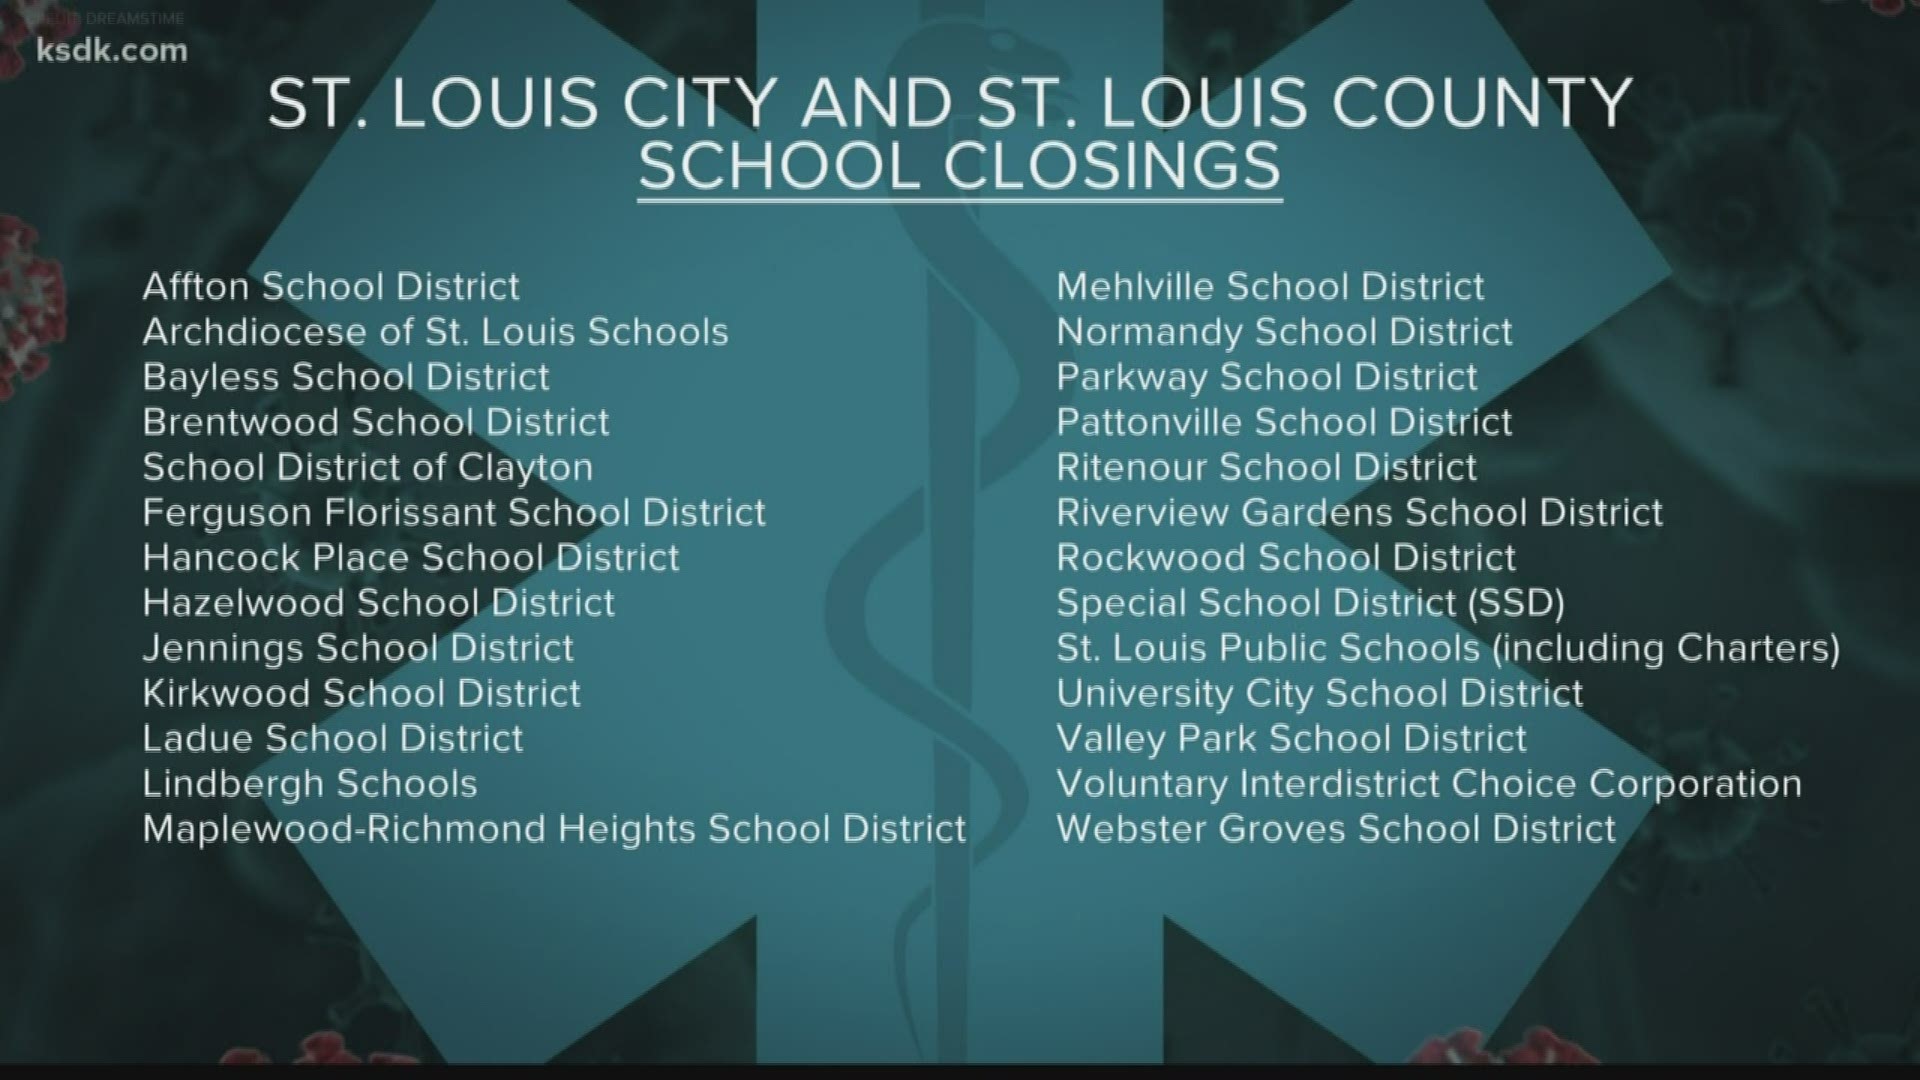 In a statement Sunday, most major school districts in the area announced closures to begin Wednesday and last into April